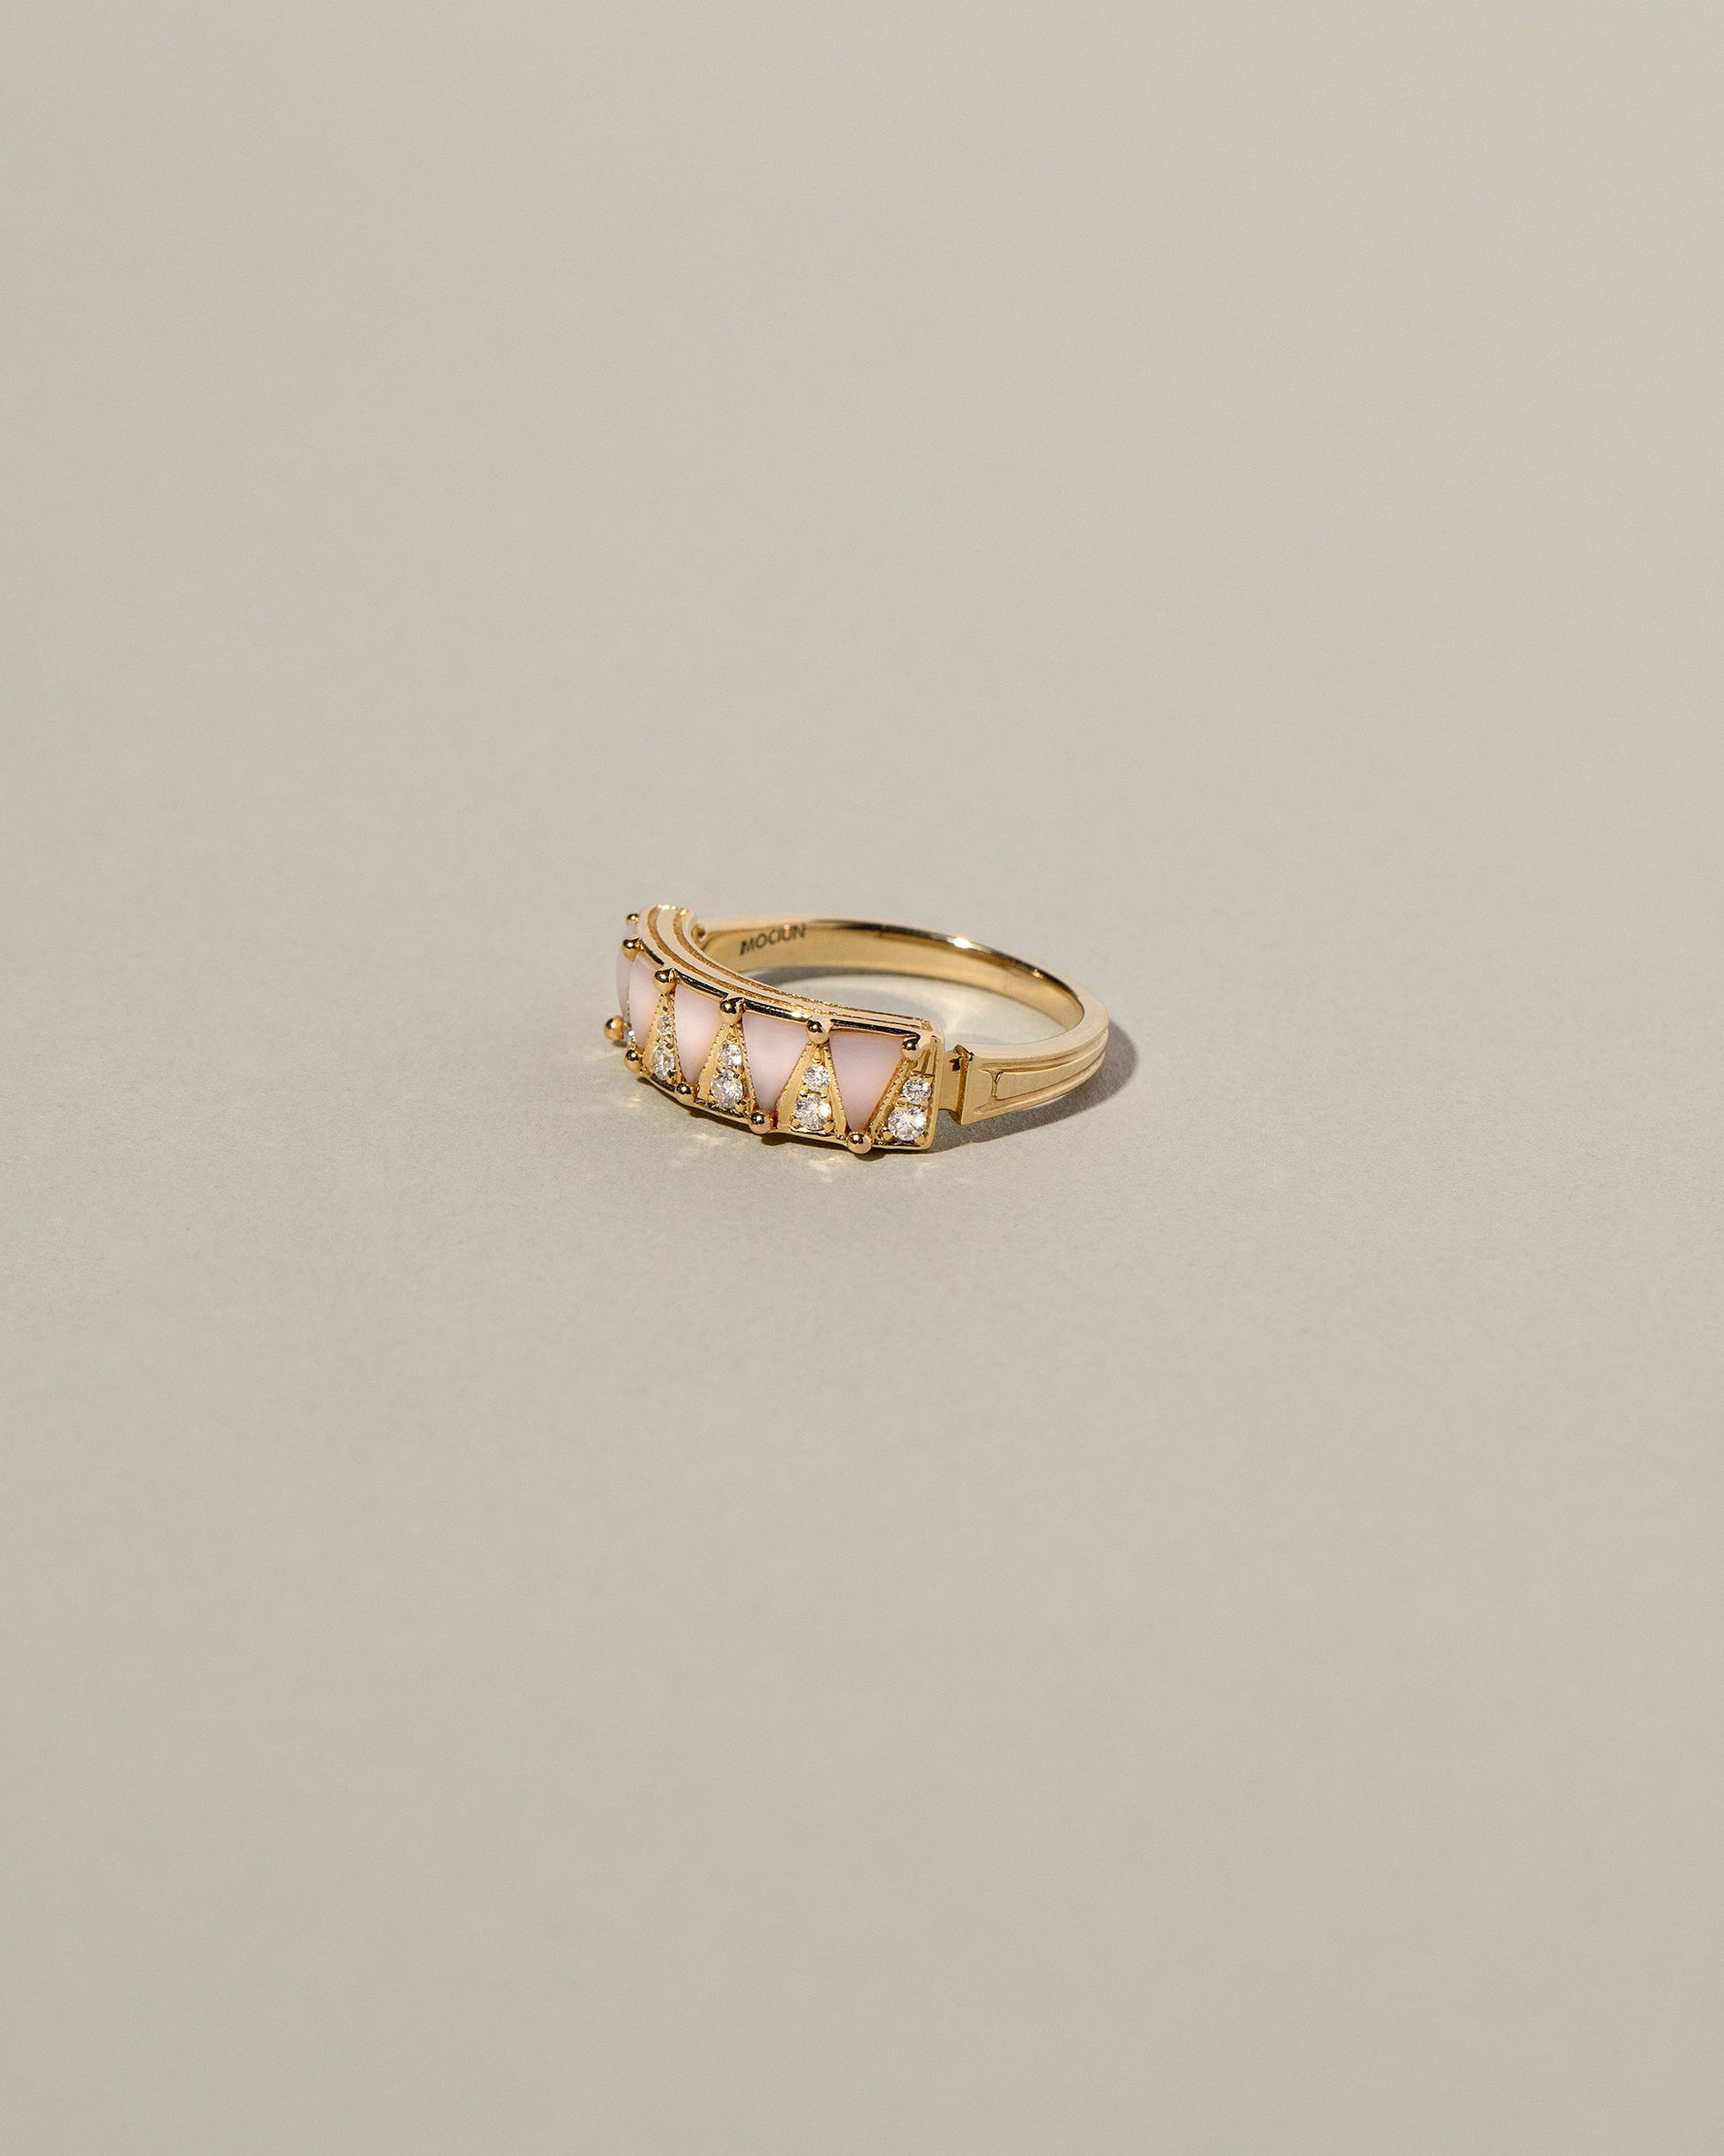  Five Triangle Ring - Pink Opal on light color background.